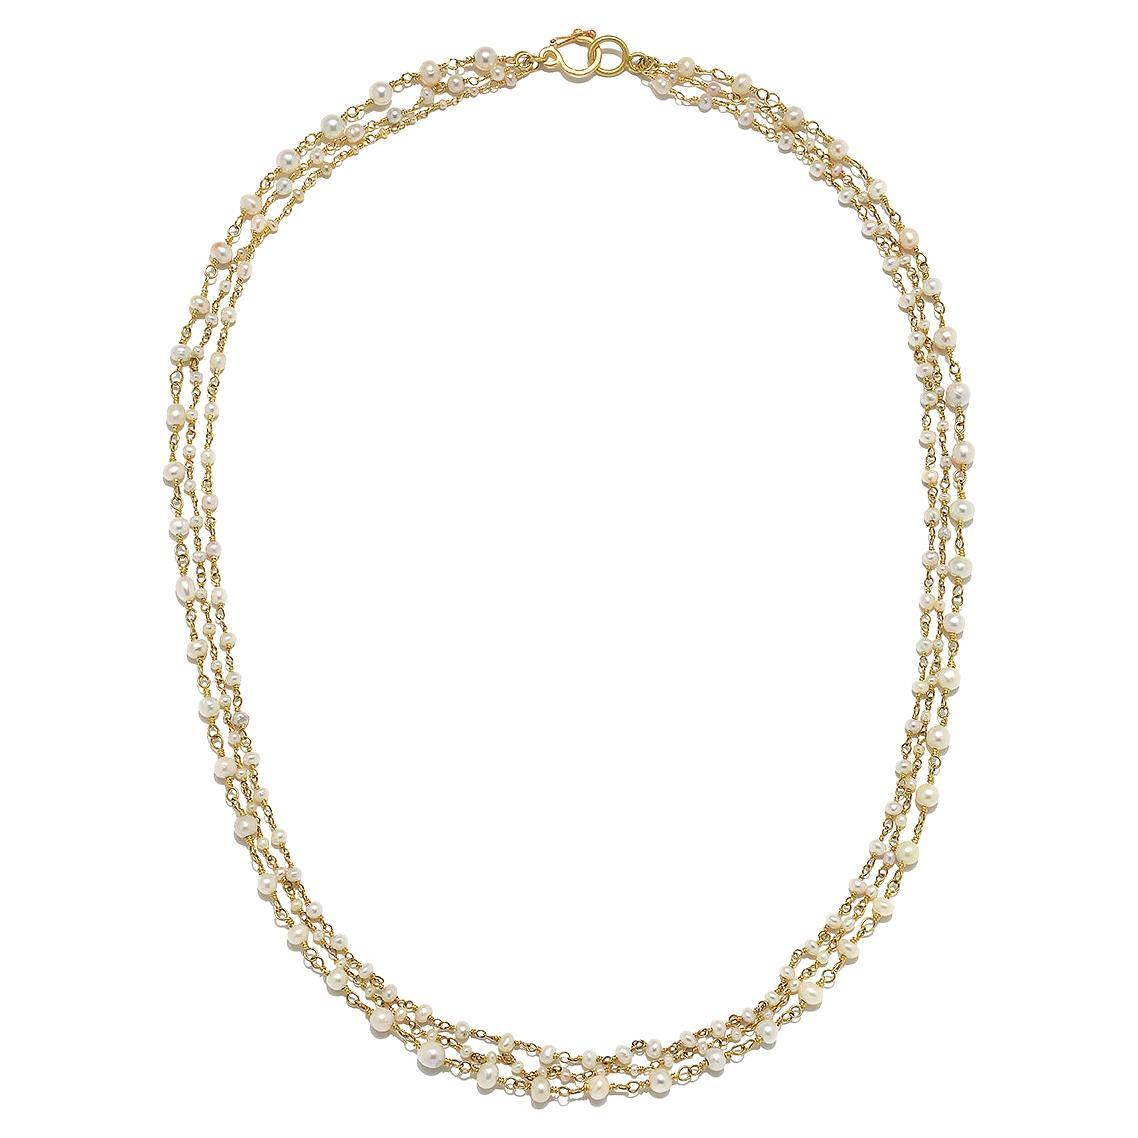 Faye Kim 18 Karat Gold Handwrapped Natural Pearl Chain Necklace